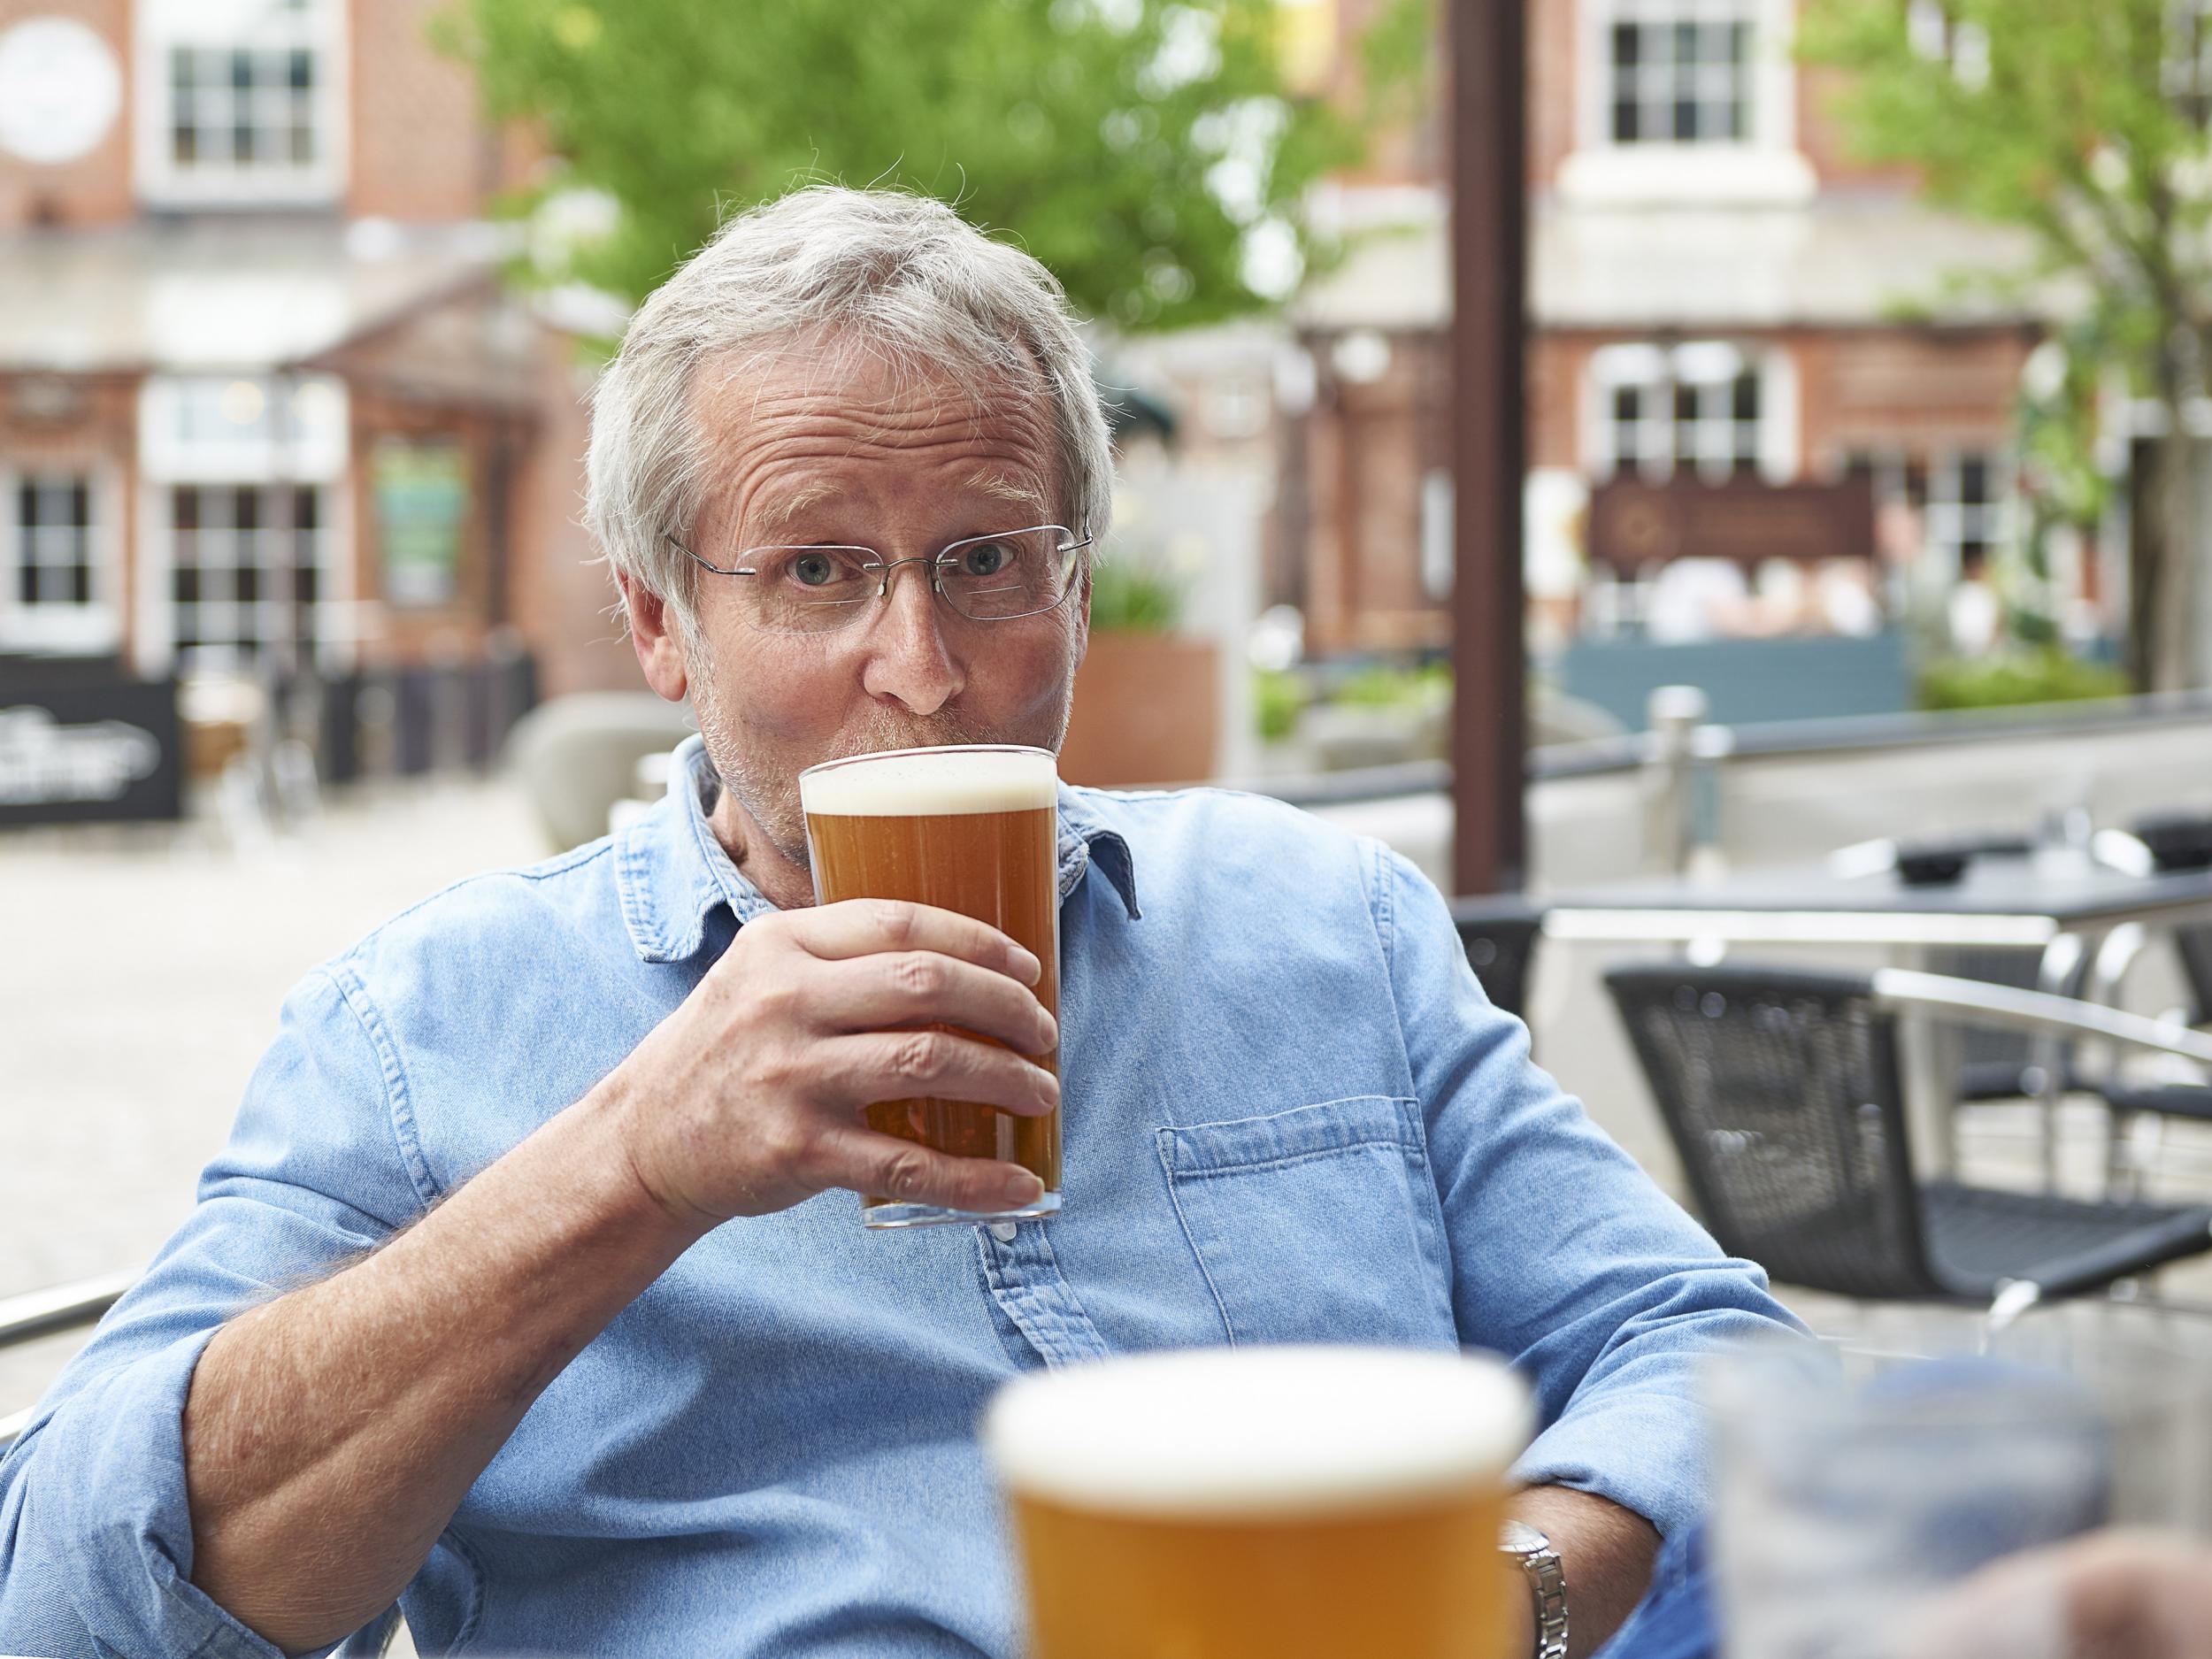 Current guidelines recommend people don’t drink more than 14 units of alcohol per week